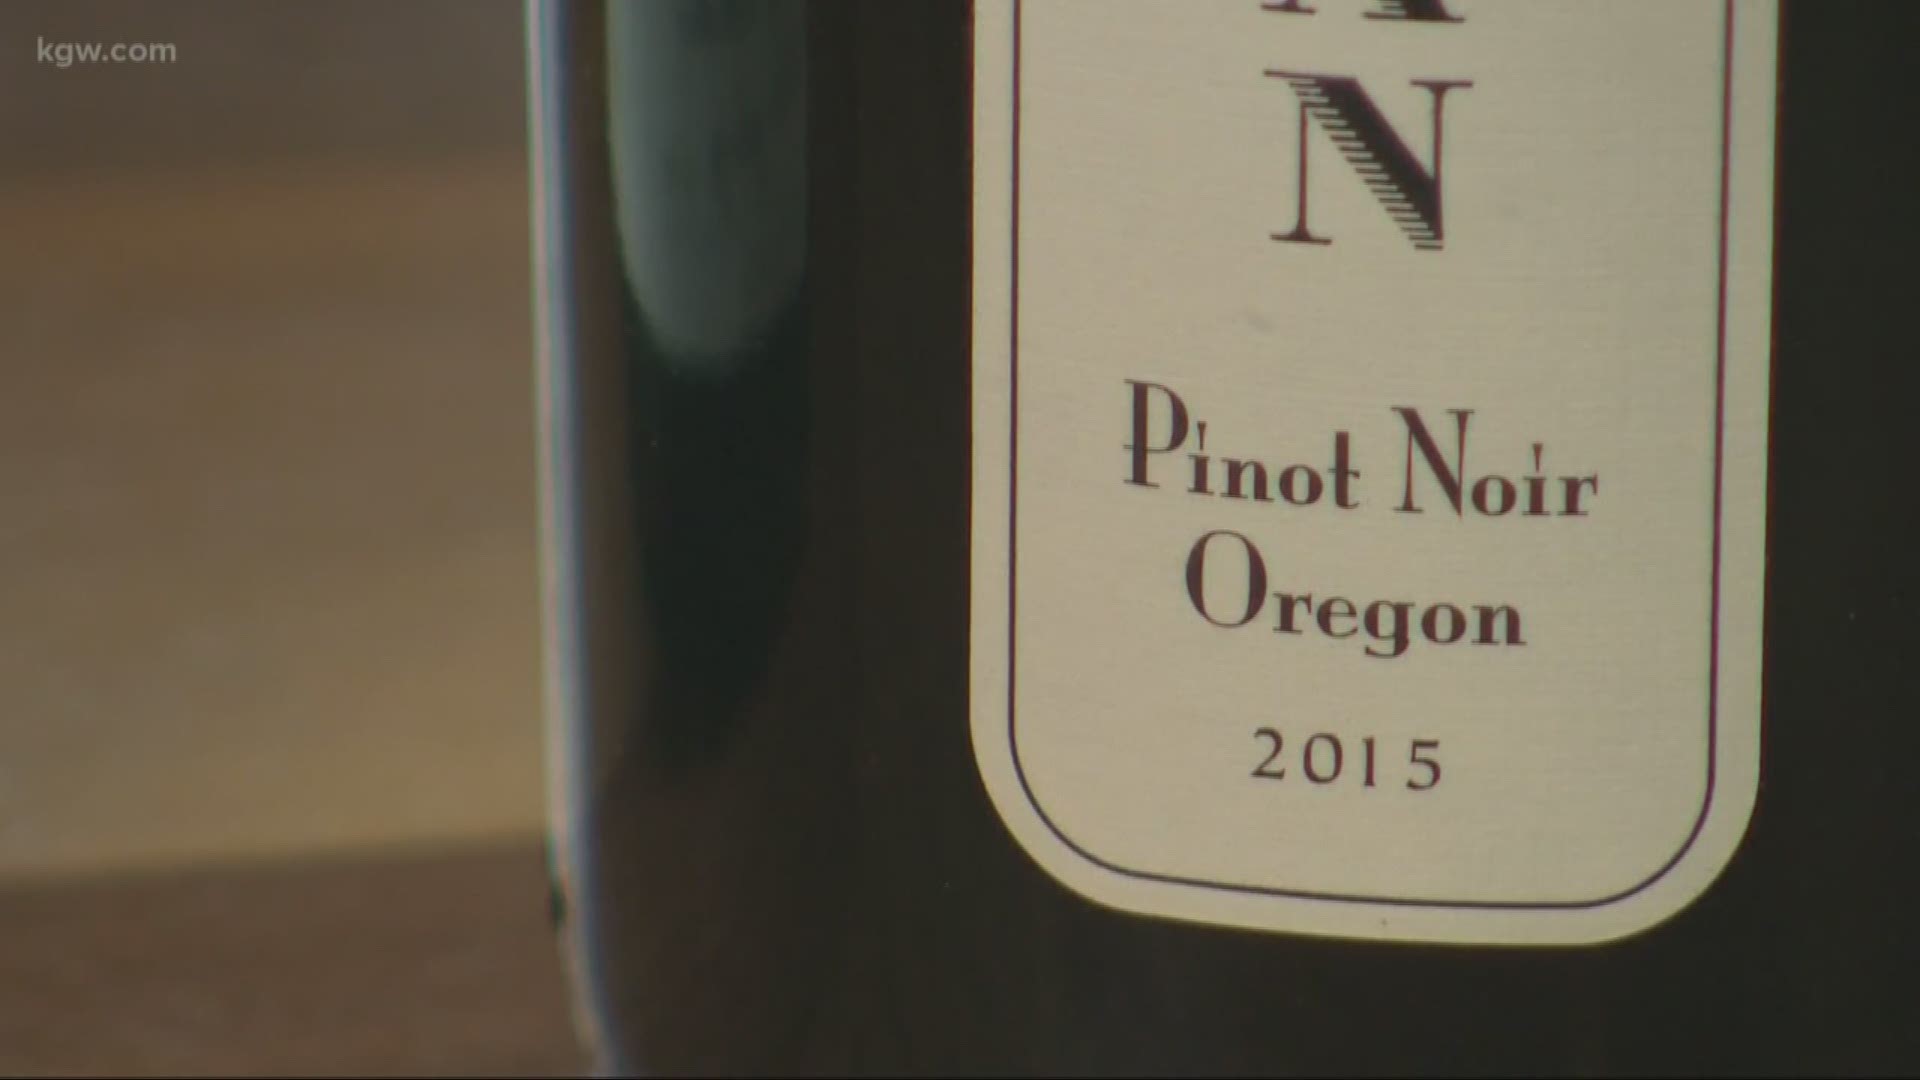 Oregon is moving to protect wine from false labeling.